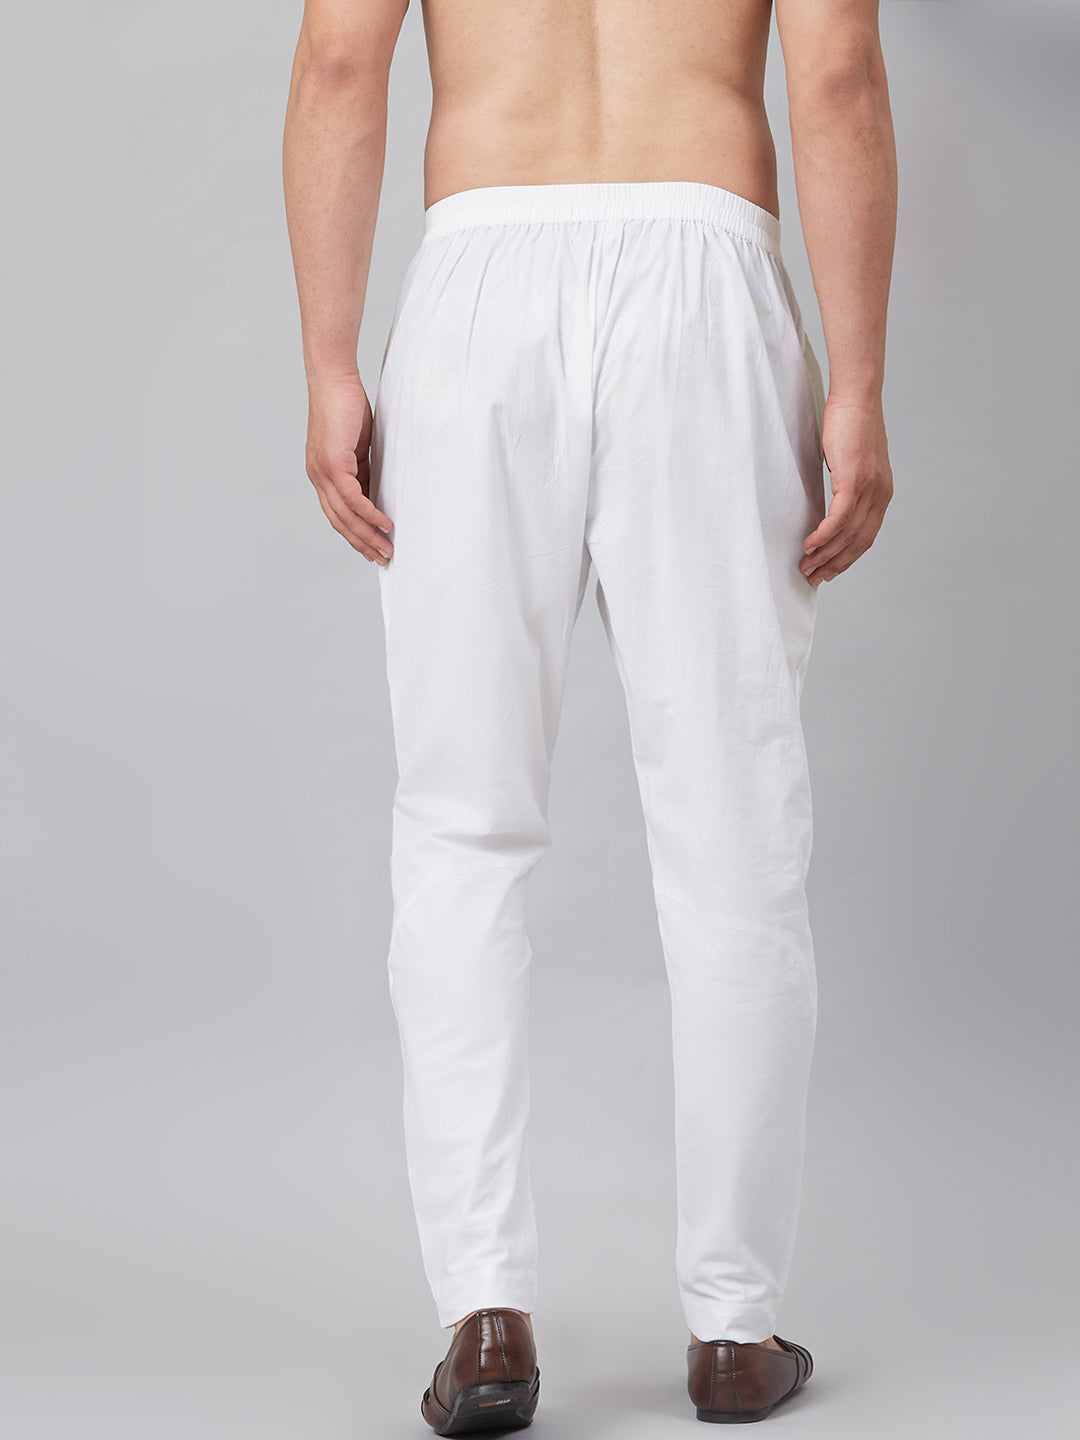 Combo Pack of 2: White Solid Cotton Trouser Pants